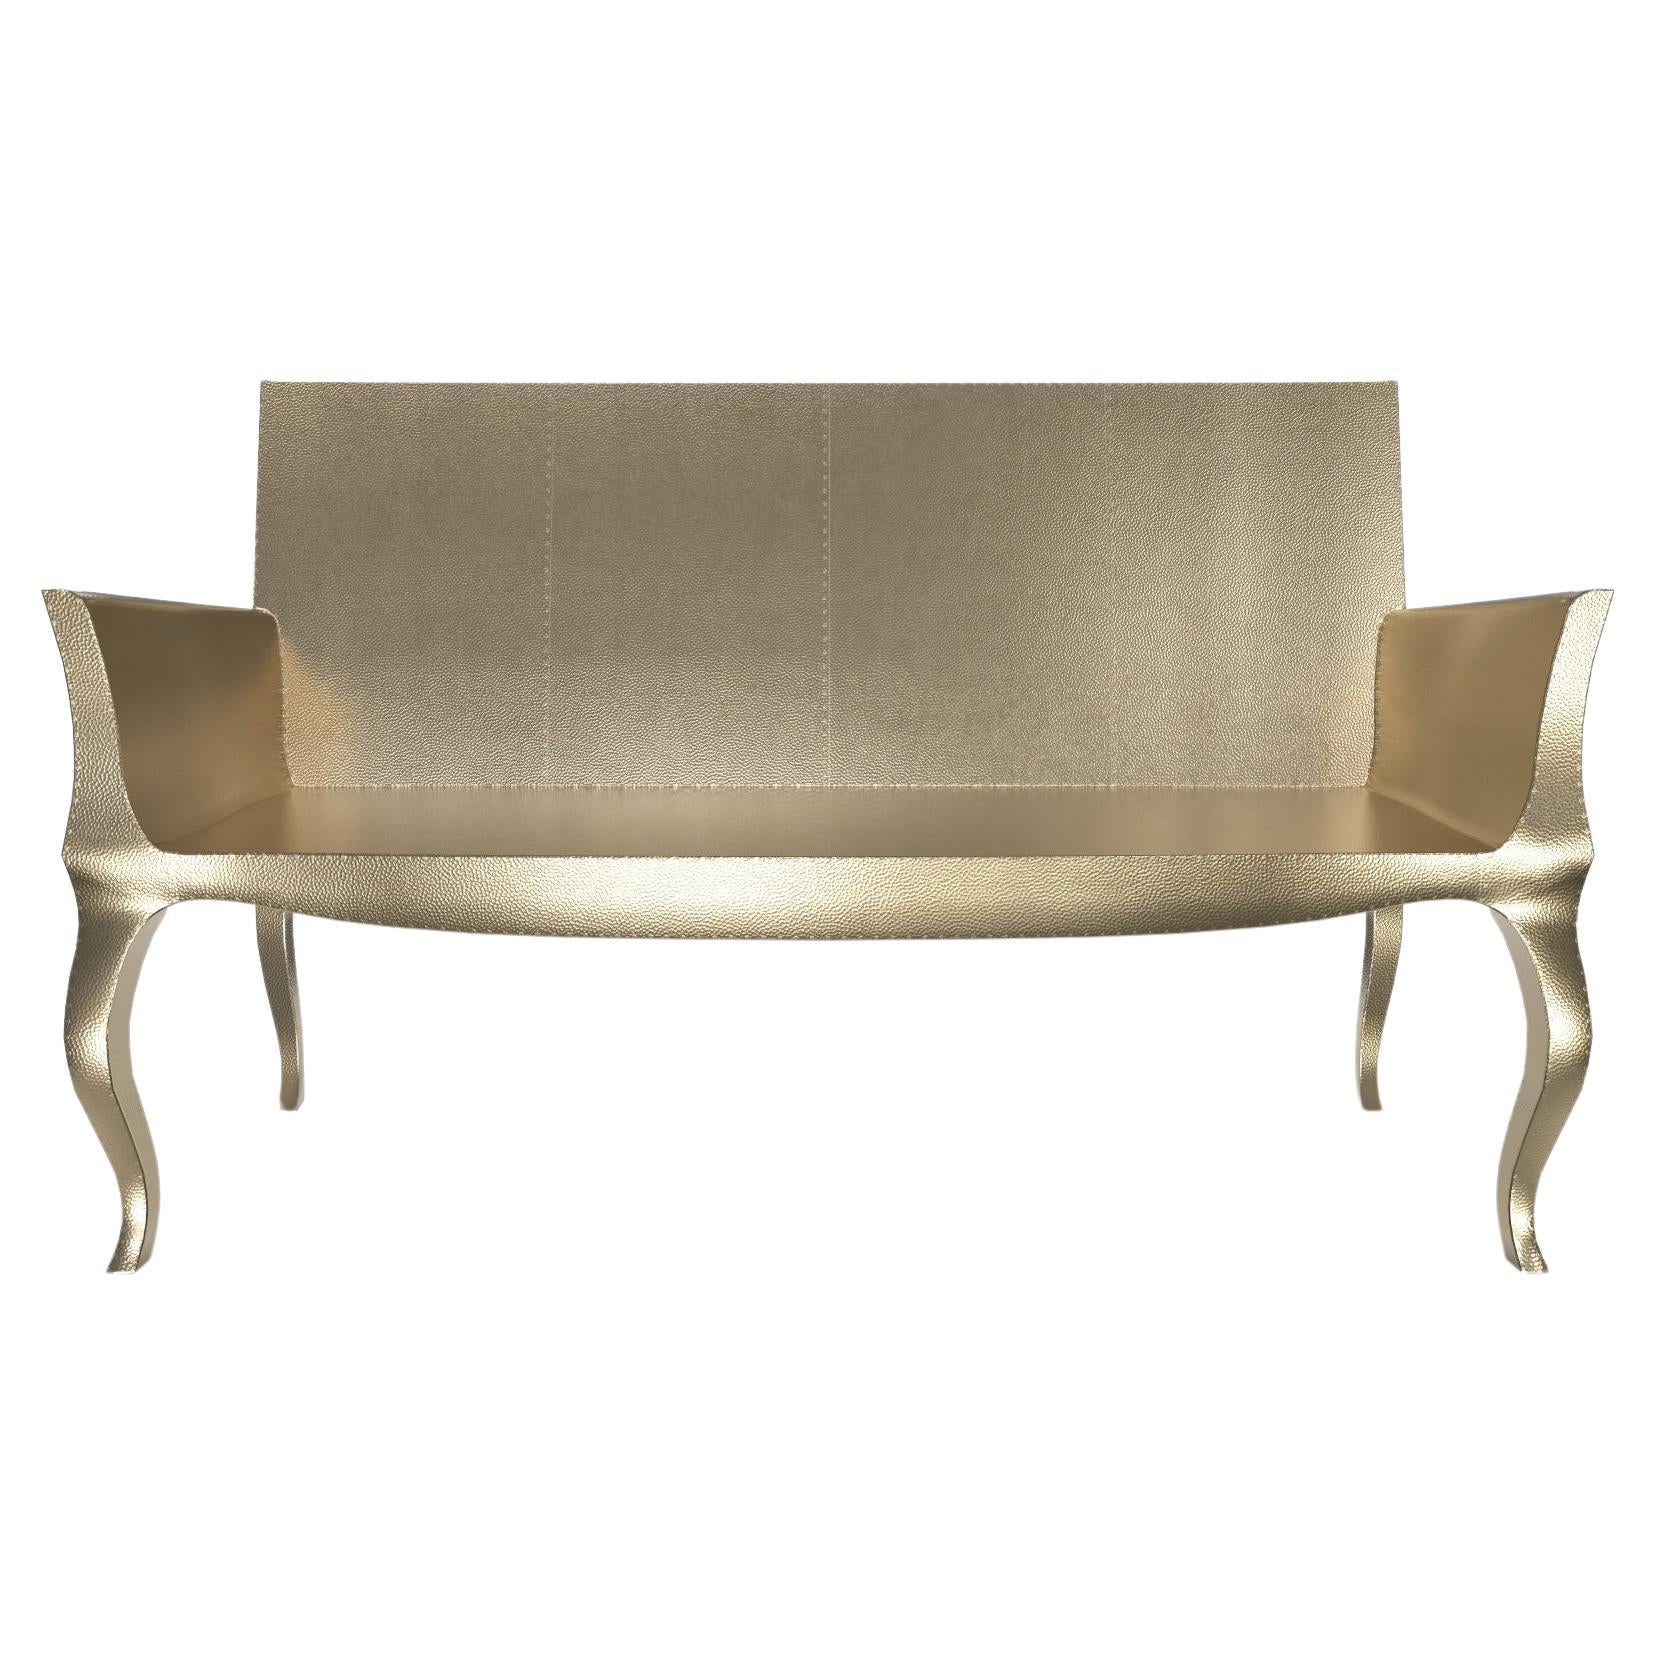 Louise Settee Art Deco Lounge Chairs in Mid. Hammered Brass by Paul Mathieu